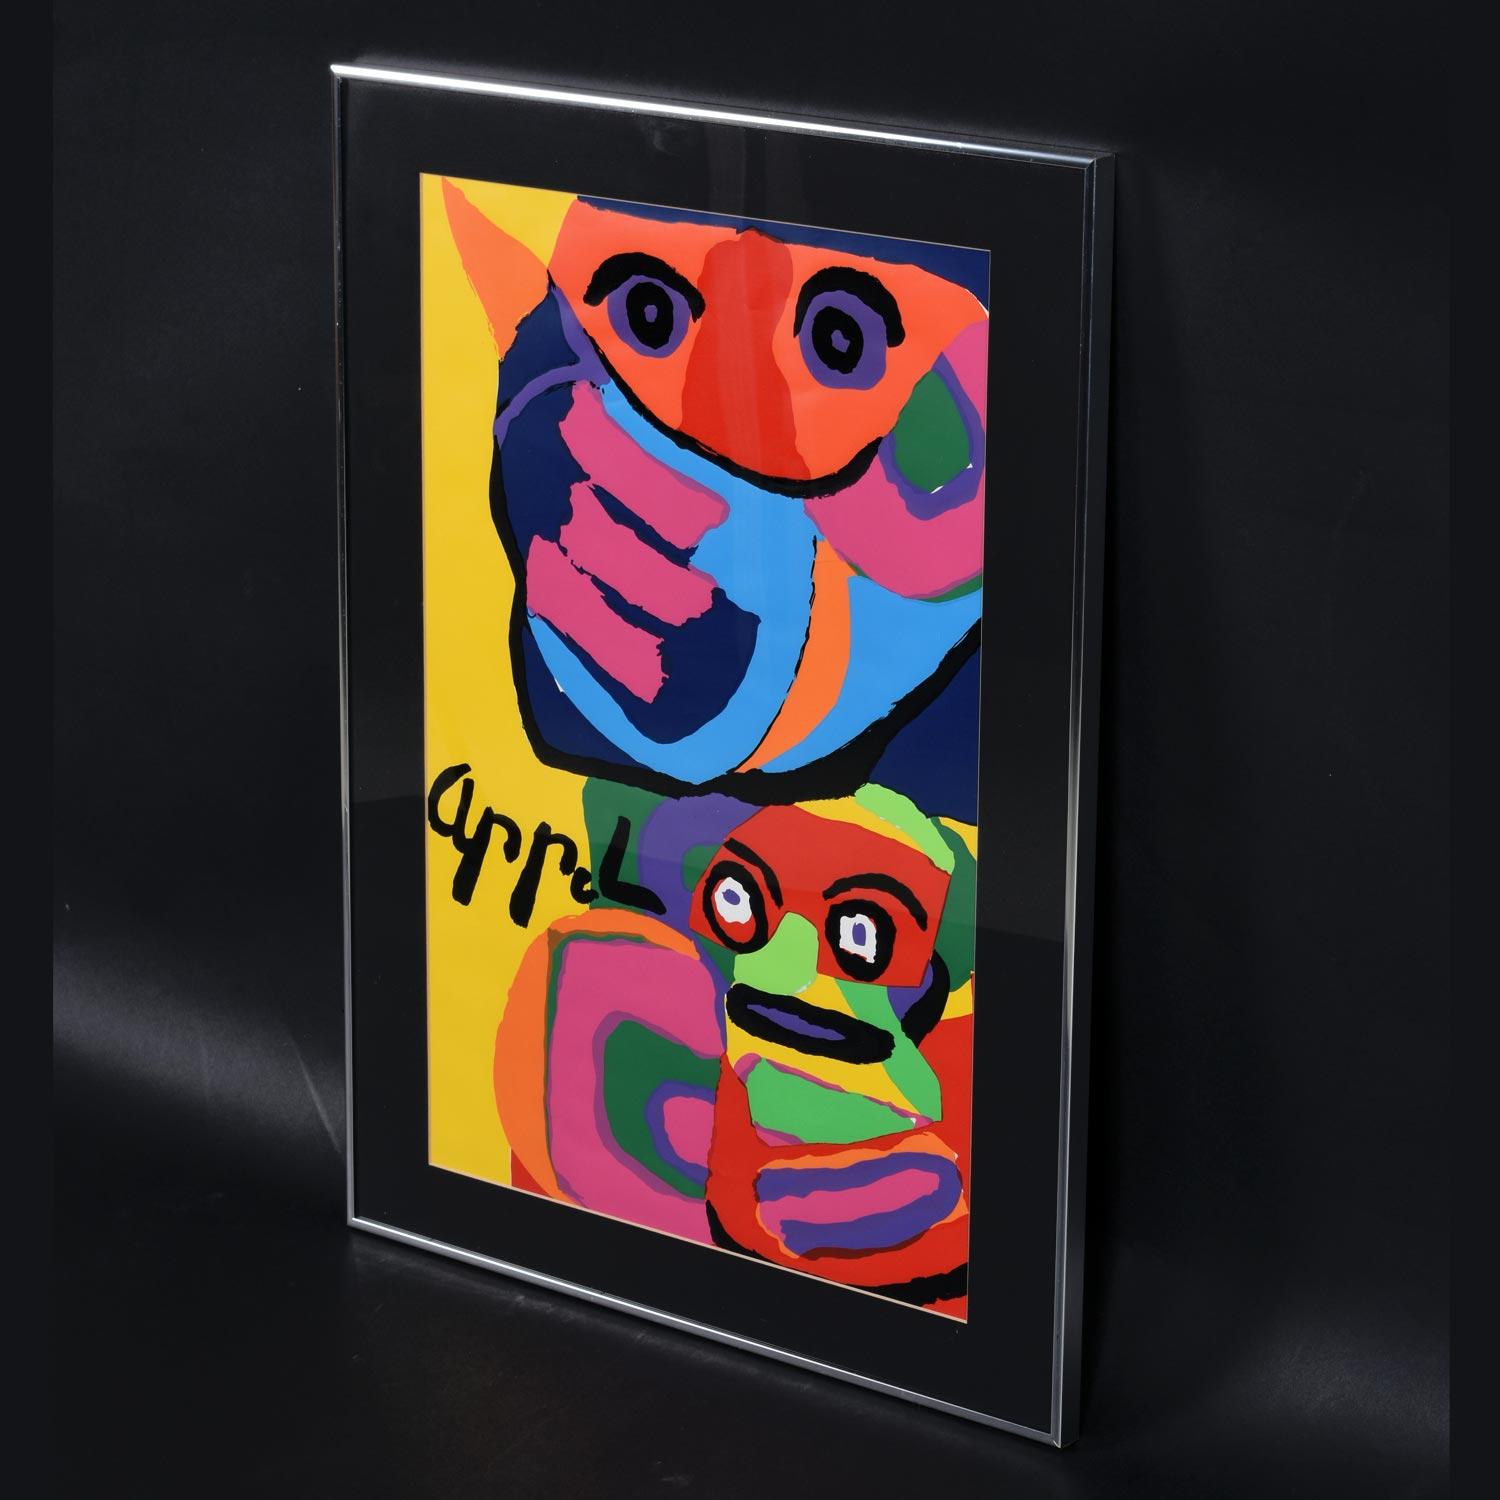 Vintage 1960s Karel Appel rhino and monkey framed serigraph. The bold artist made his plate signature part of the image. The layering of inks can be seen on close inspection, showing the exceptional quality of this lithograph. There is no edition or